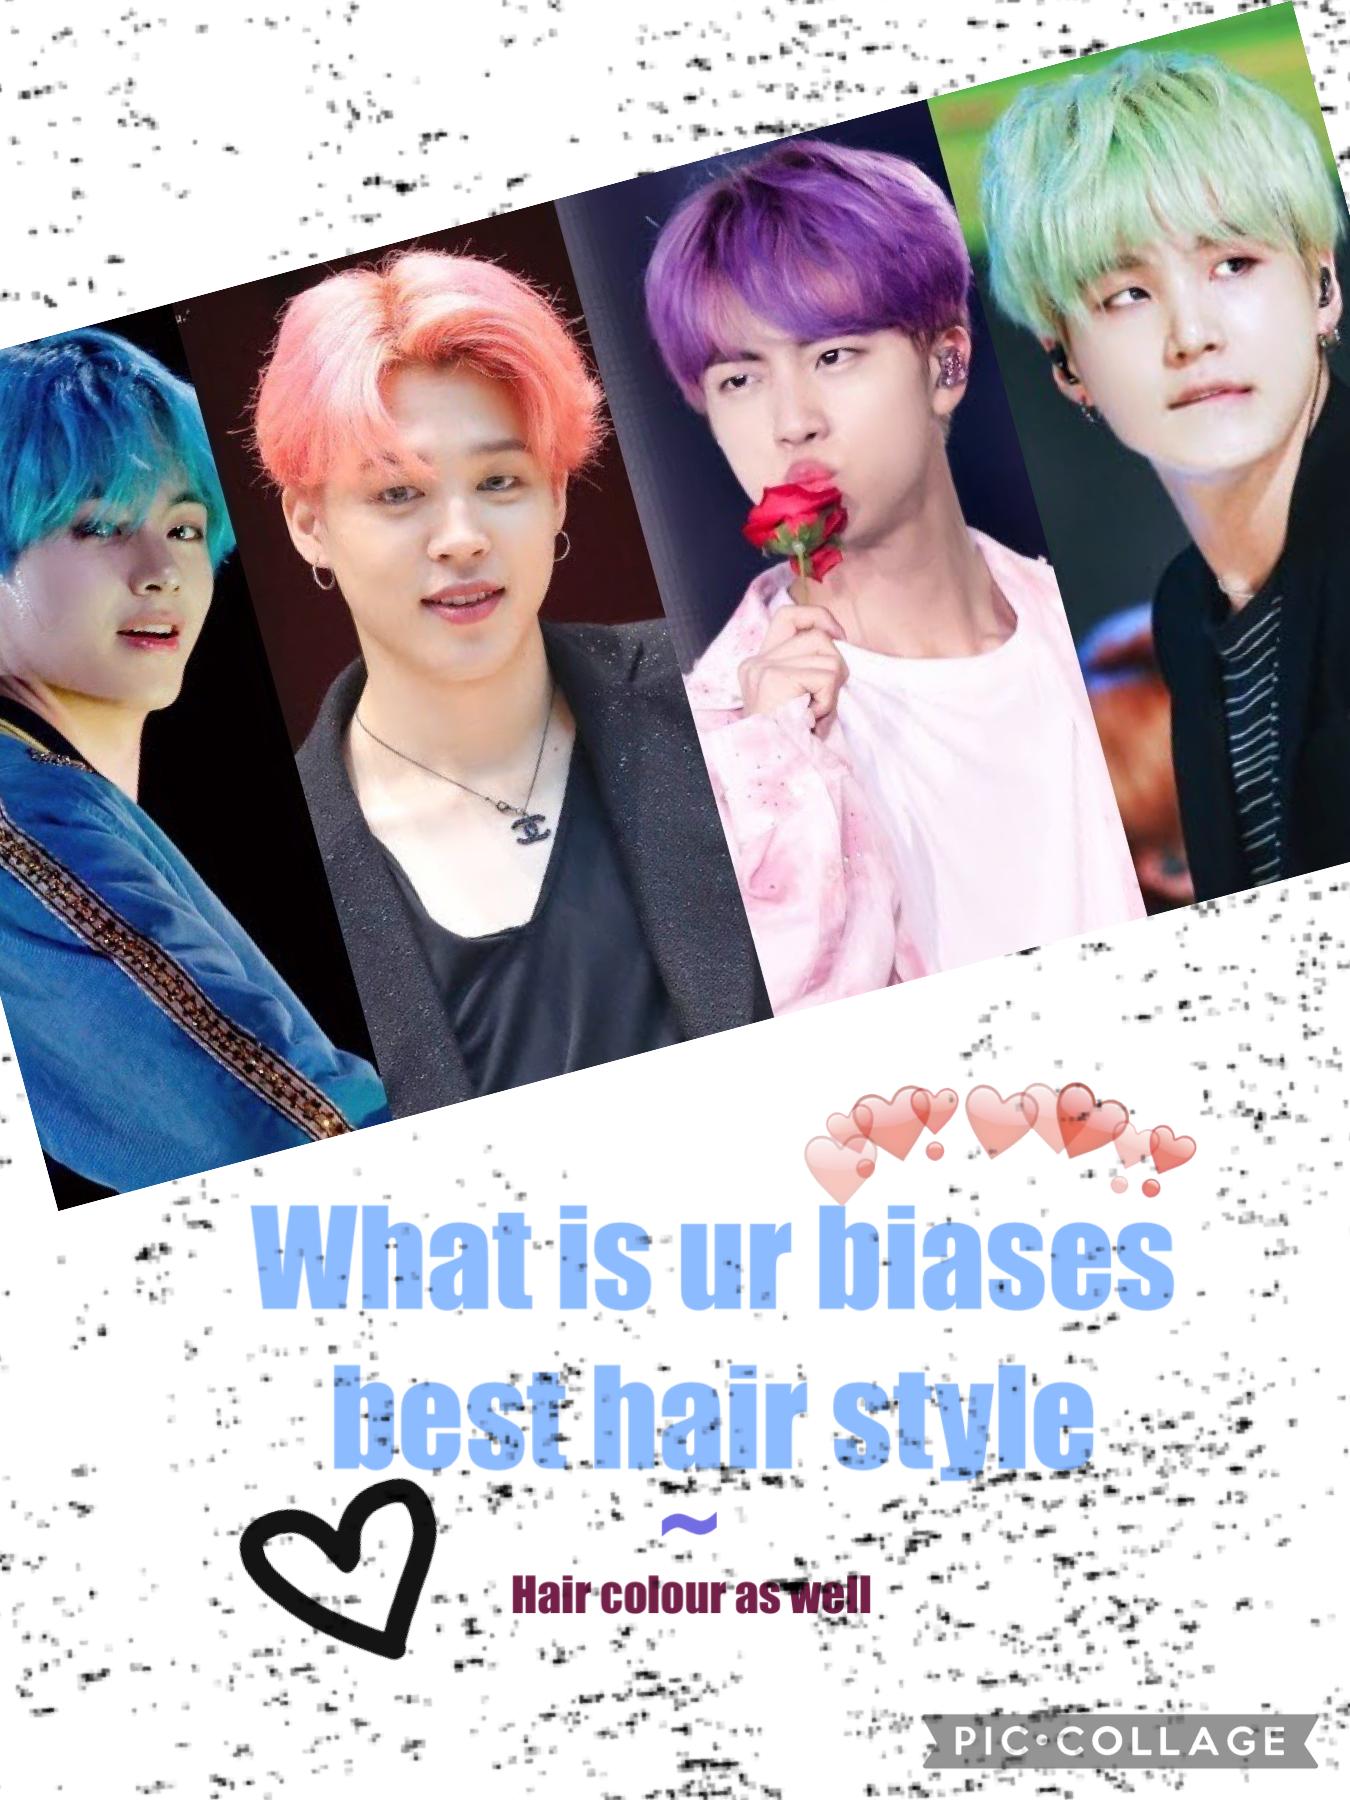 Tap
What is ur biases best hairstyle~colour of the hairstyle 
(No mixing exp.U can’t say Vs curly hair and the blue colour he has in boy with luv)